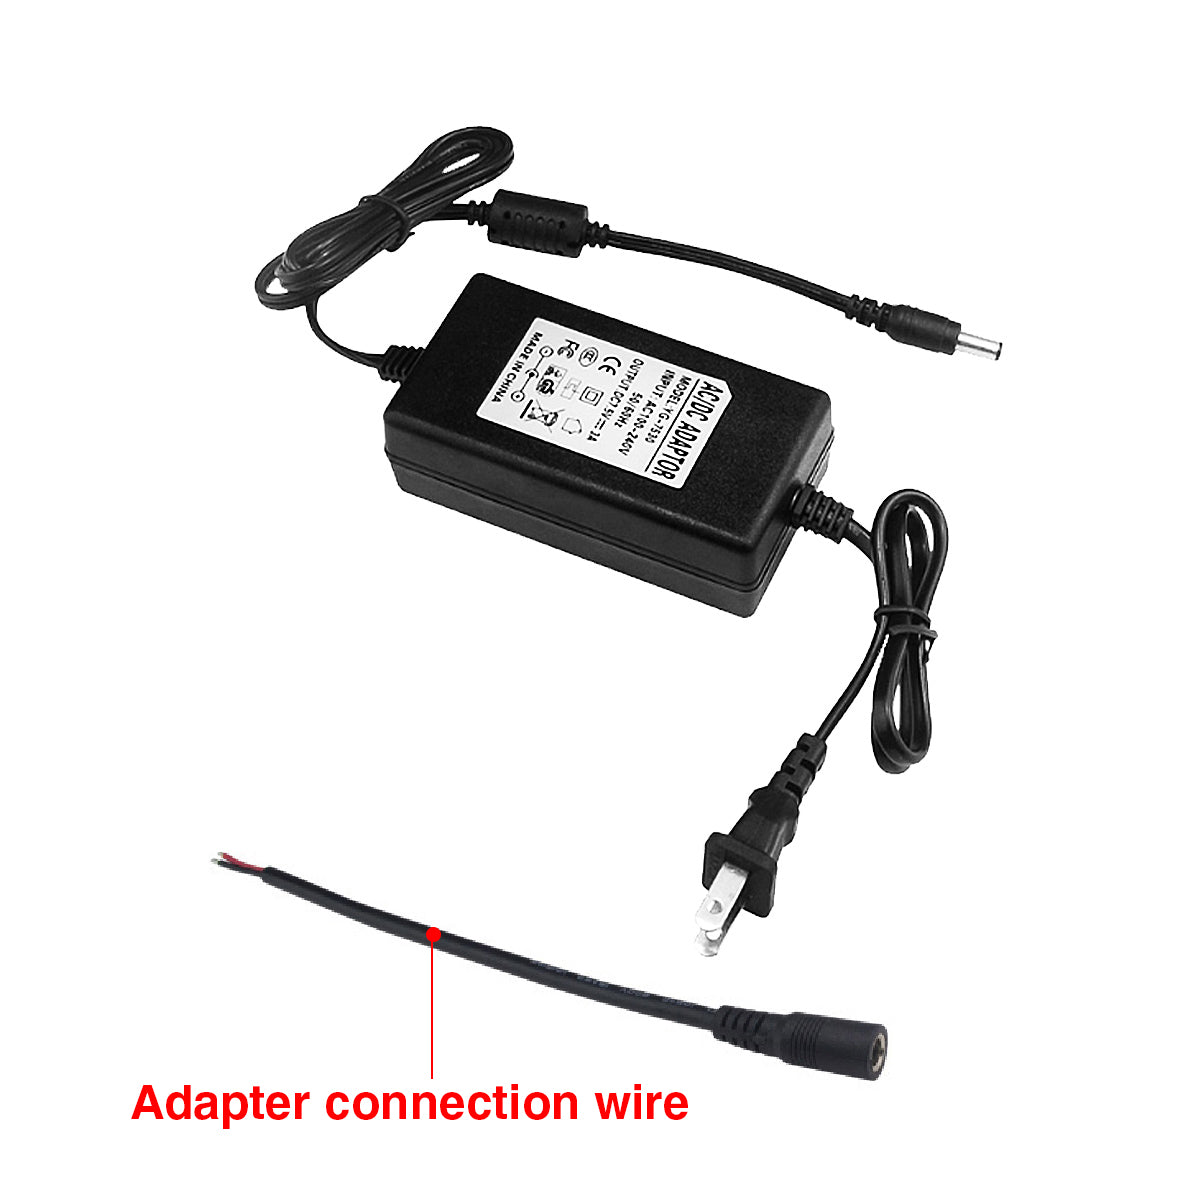 Power Supply Adapter for Robot Arm DC Plug 7.5V 3A